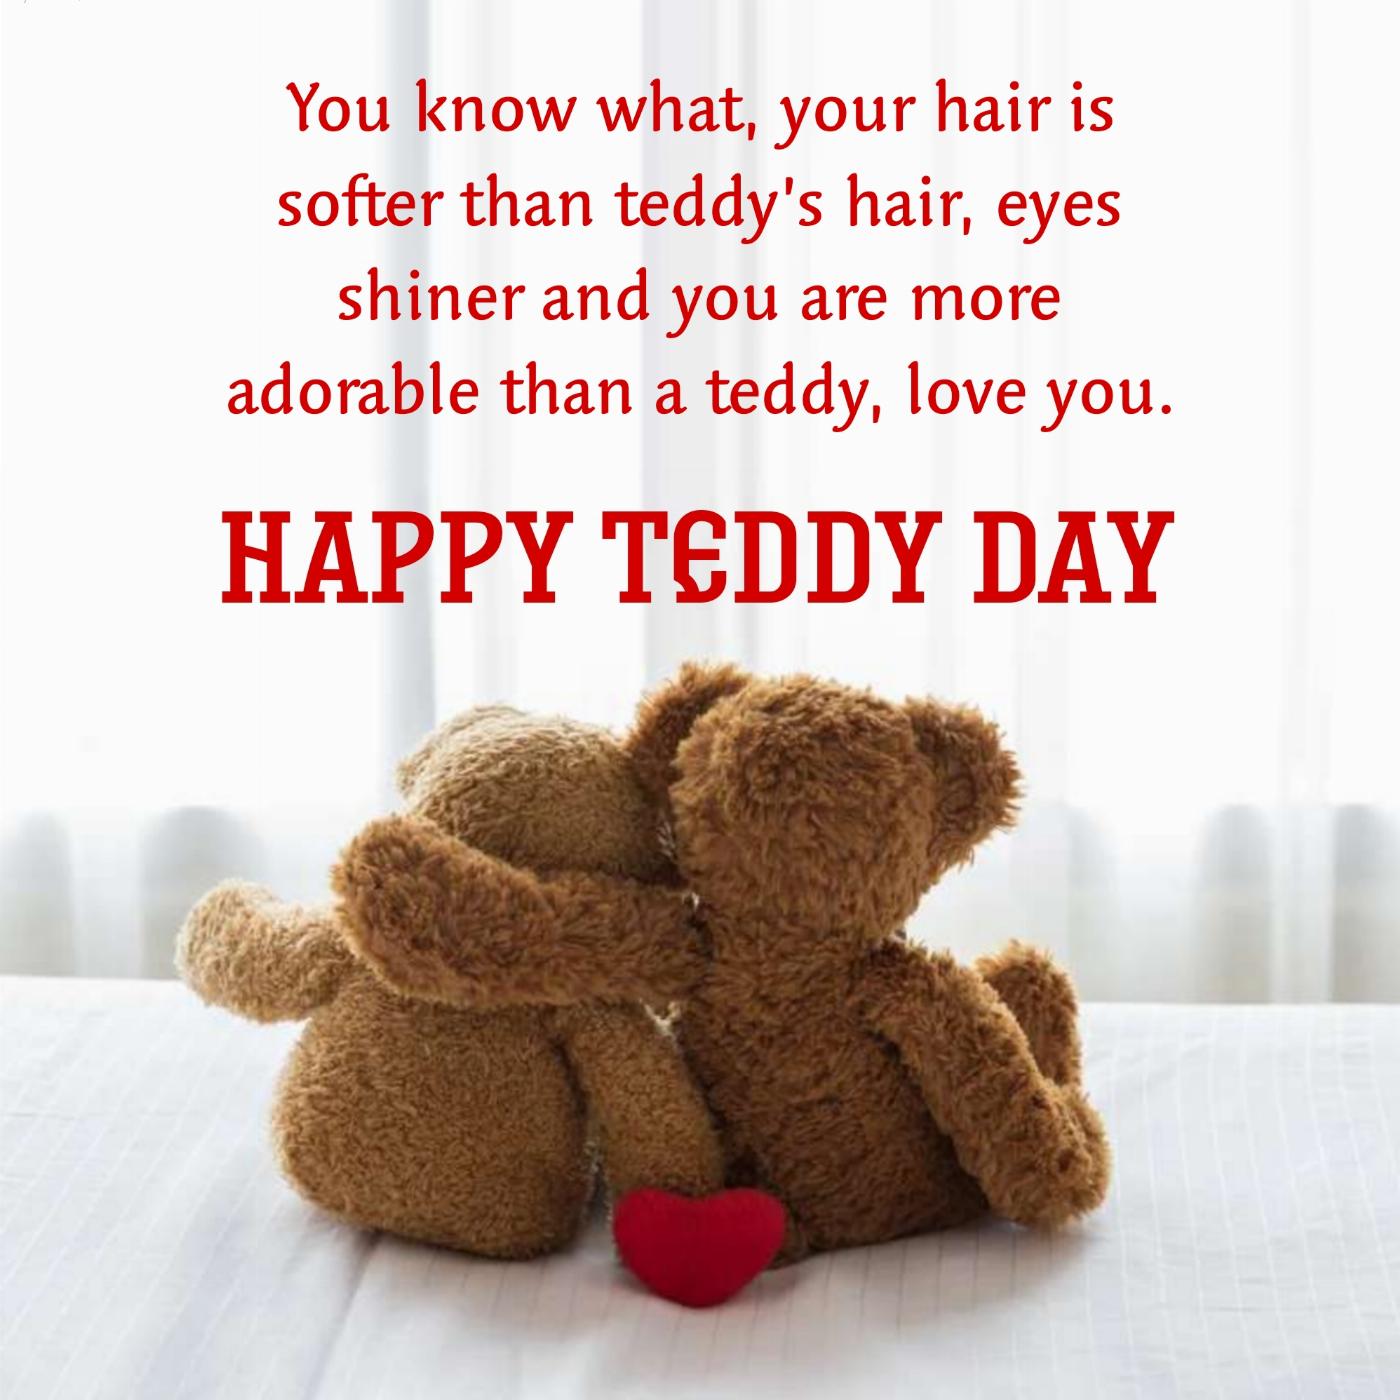 You know what your hair is softer than teddys hair